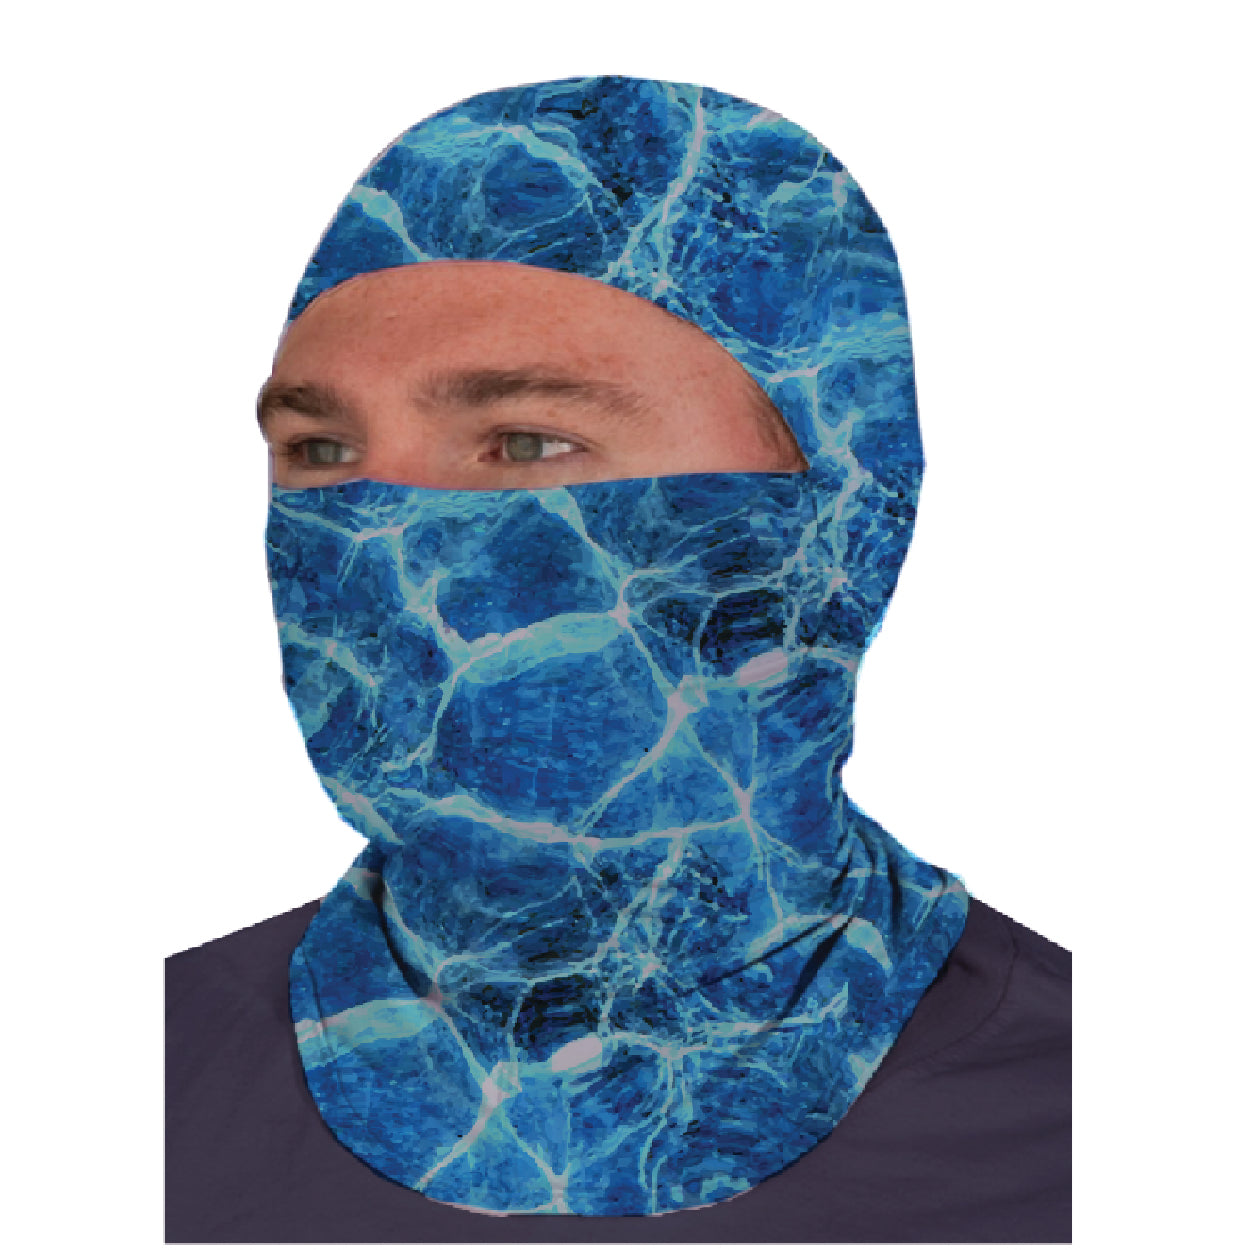  The Sun Hood is a great choice for year-round sun protection. This UPF 50+ sun hood provides full coverage and helps protect against the sun’s harmful rays to keep you outdoors longer.